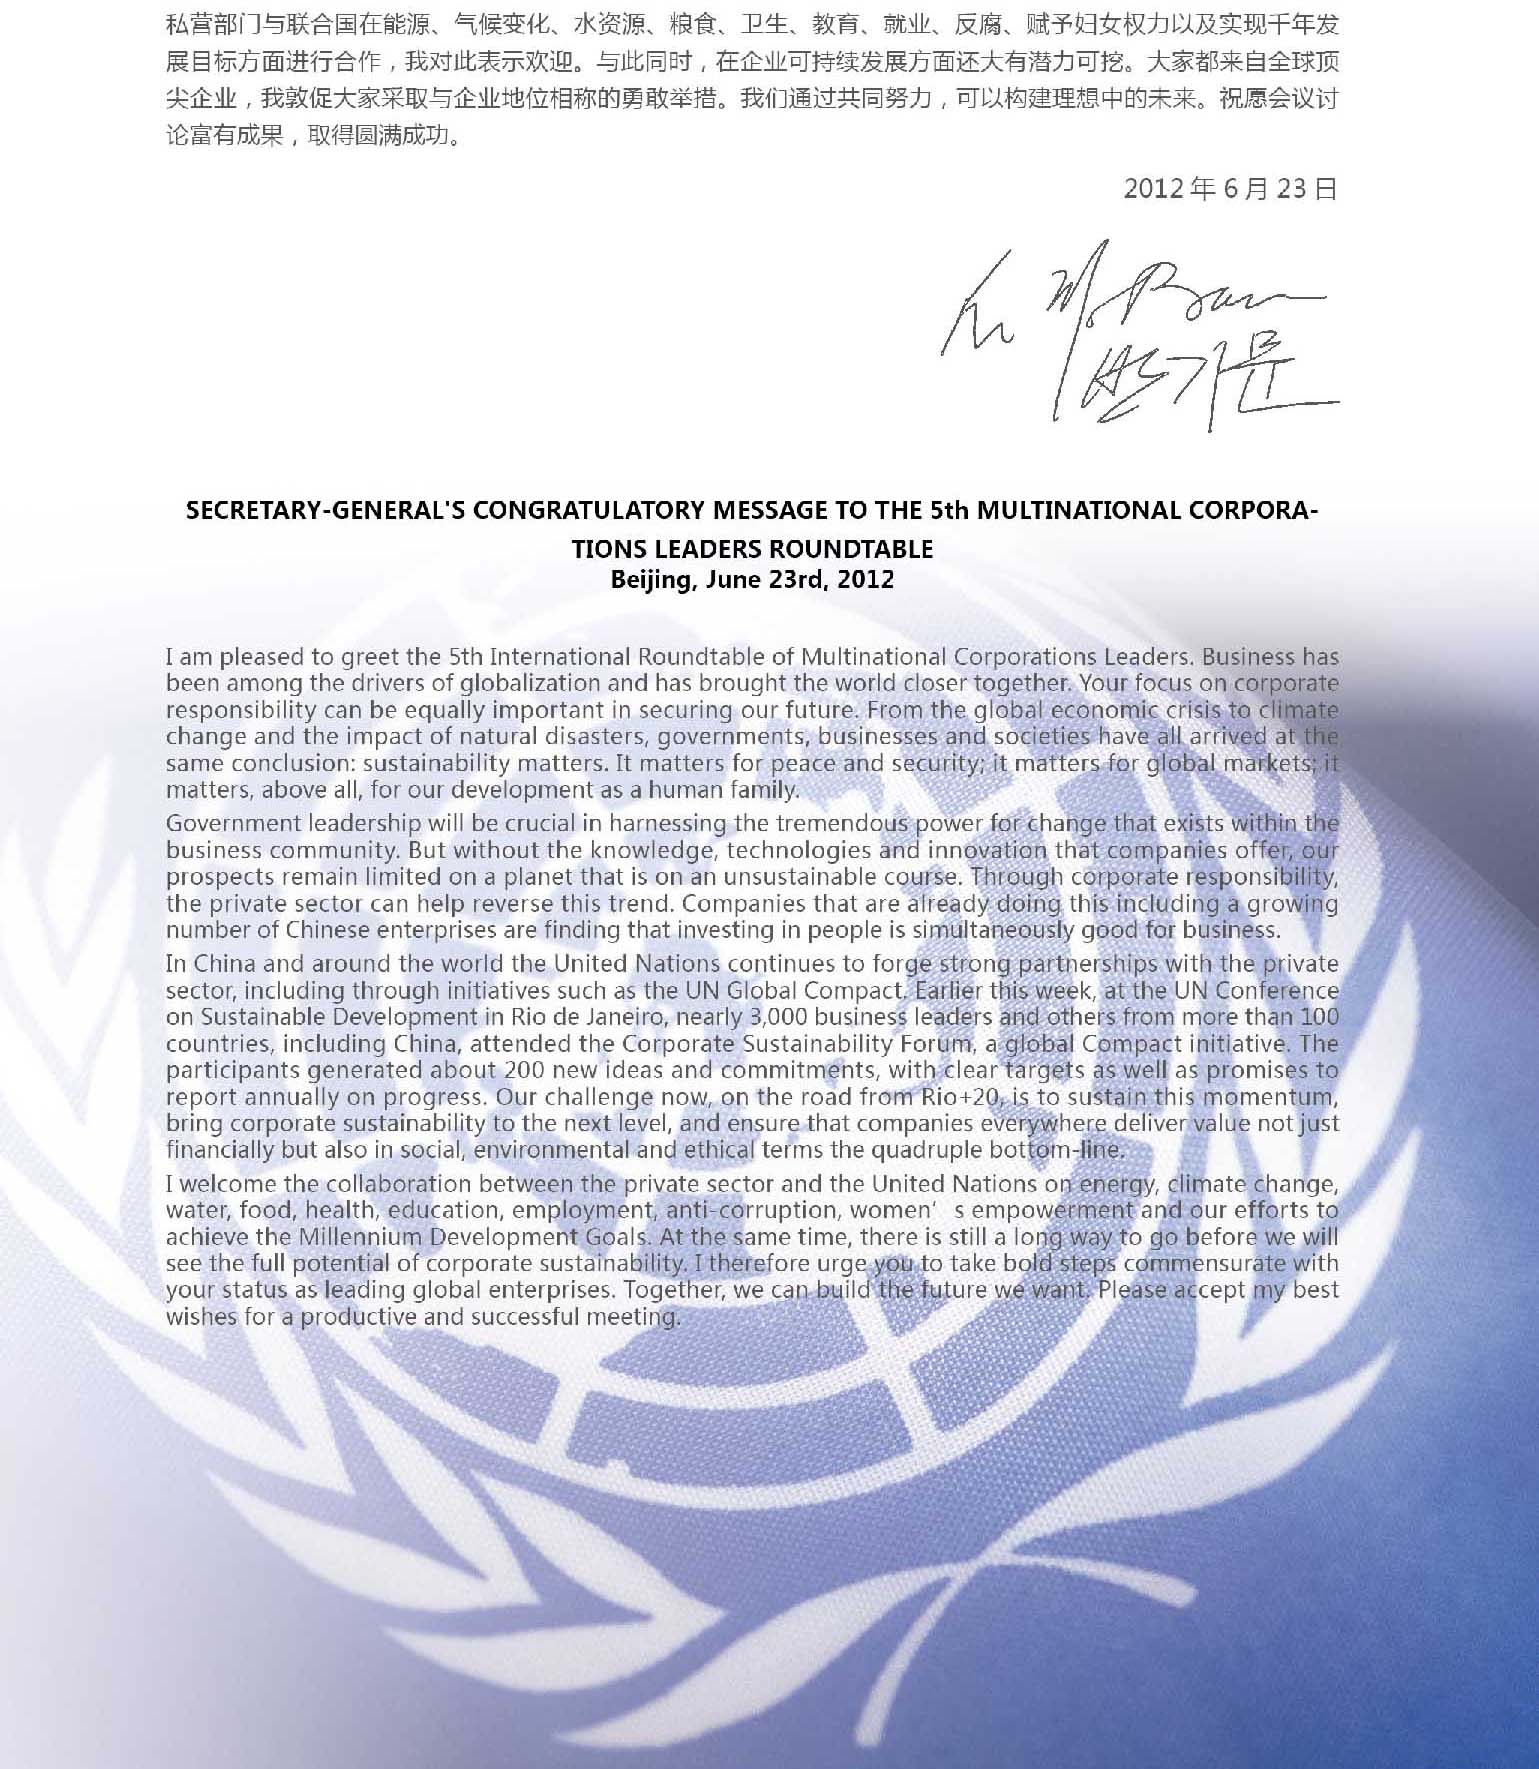 Former UN Secretary-General Mr. Ban Ki-Moon has sent congratulatory messages to the International Roundtable of Multinational Corporations Leaders every year since 2007